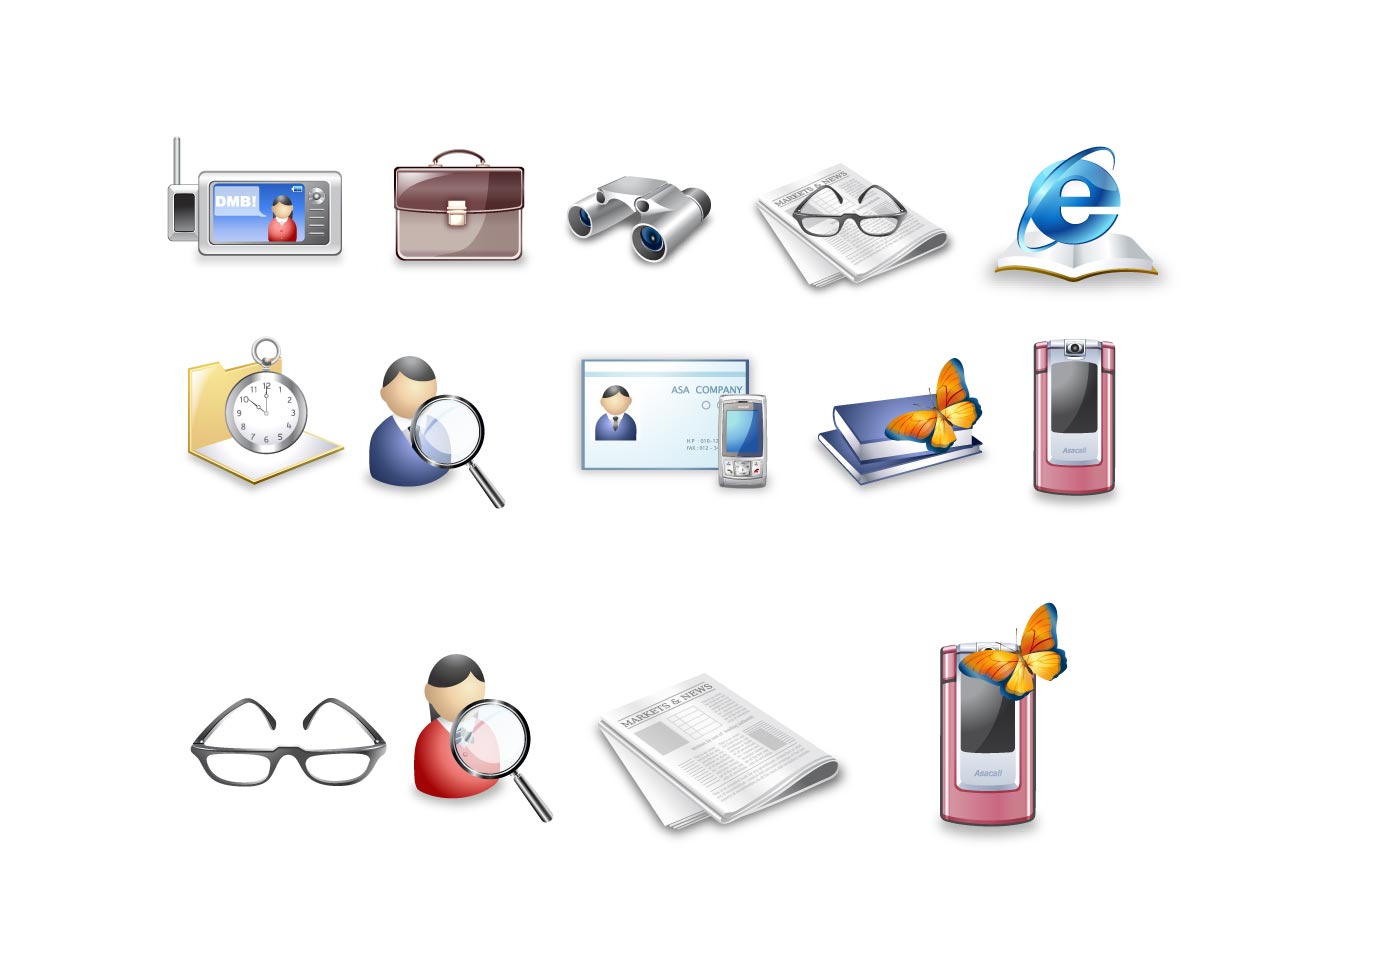 Download Beautiful Business Icons - Download Free Vector Art, Stock Graphics & Images